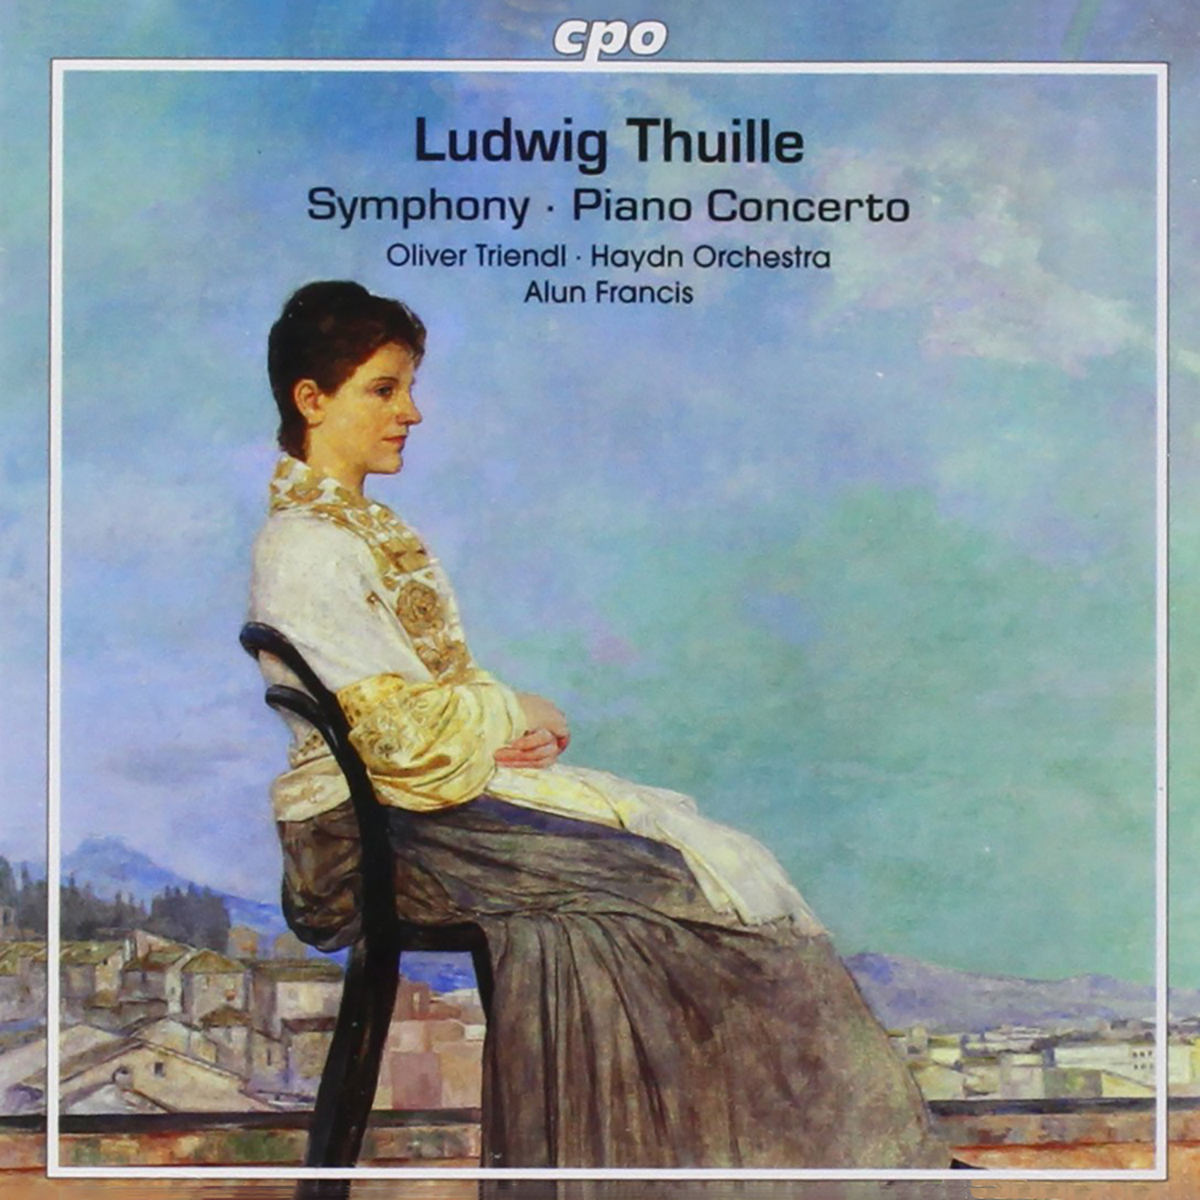 Ludwig Thuille - Piano Concerto in D major, Symphony in F major